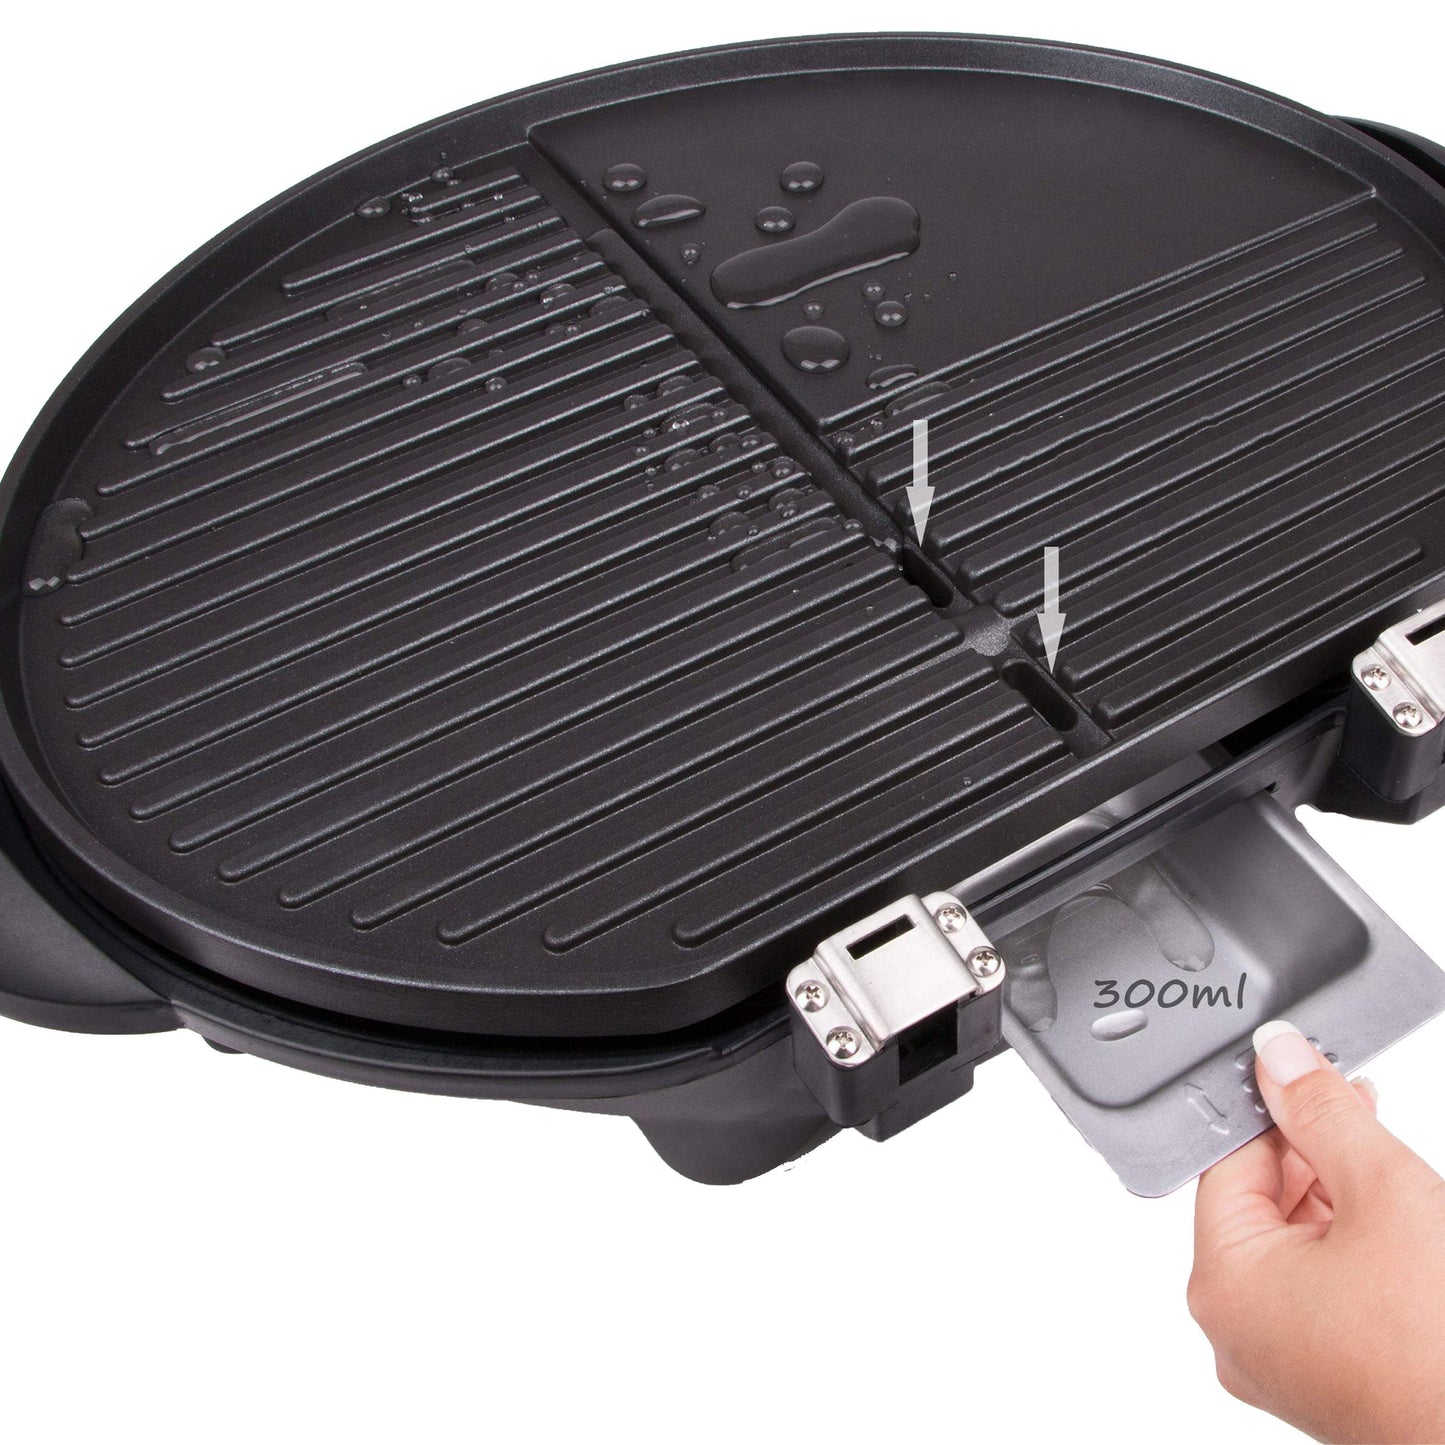 TZS First Austria Electric Kettle Barbecue Grill with Stand and Lid 2500W-Royal Brands Co-